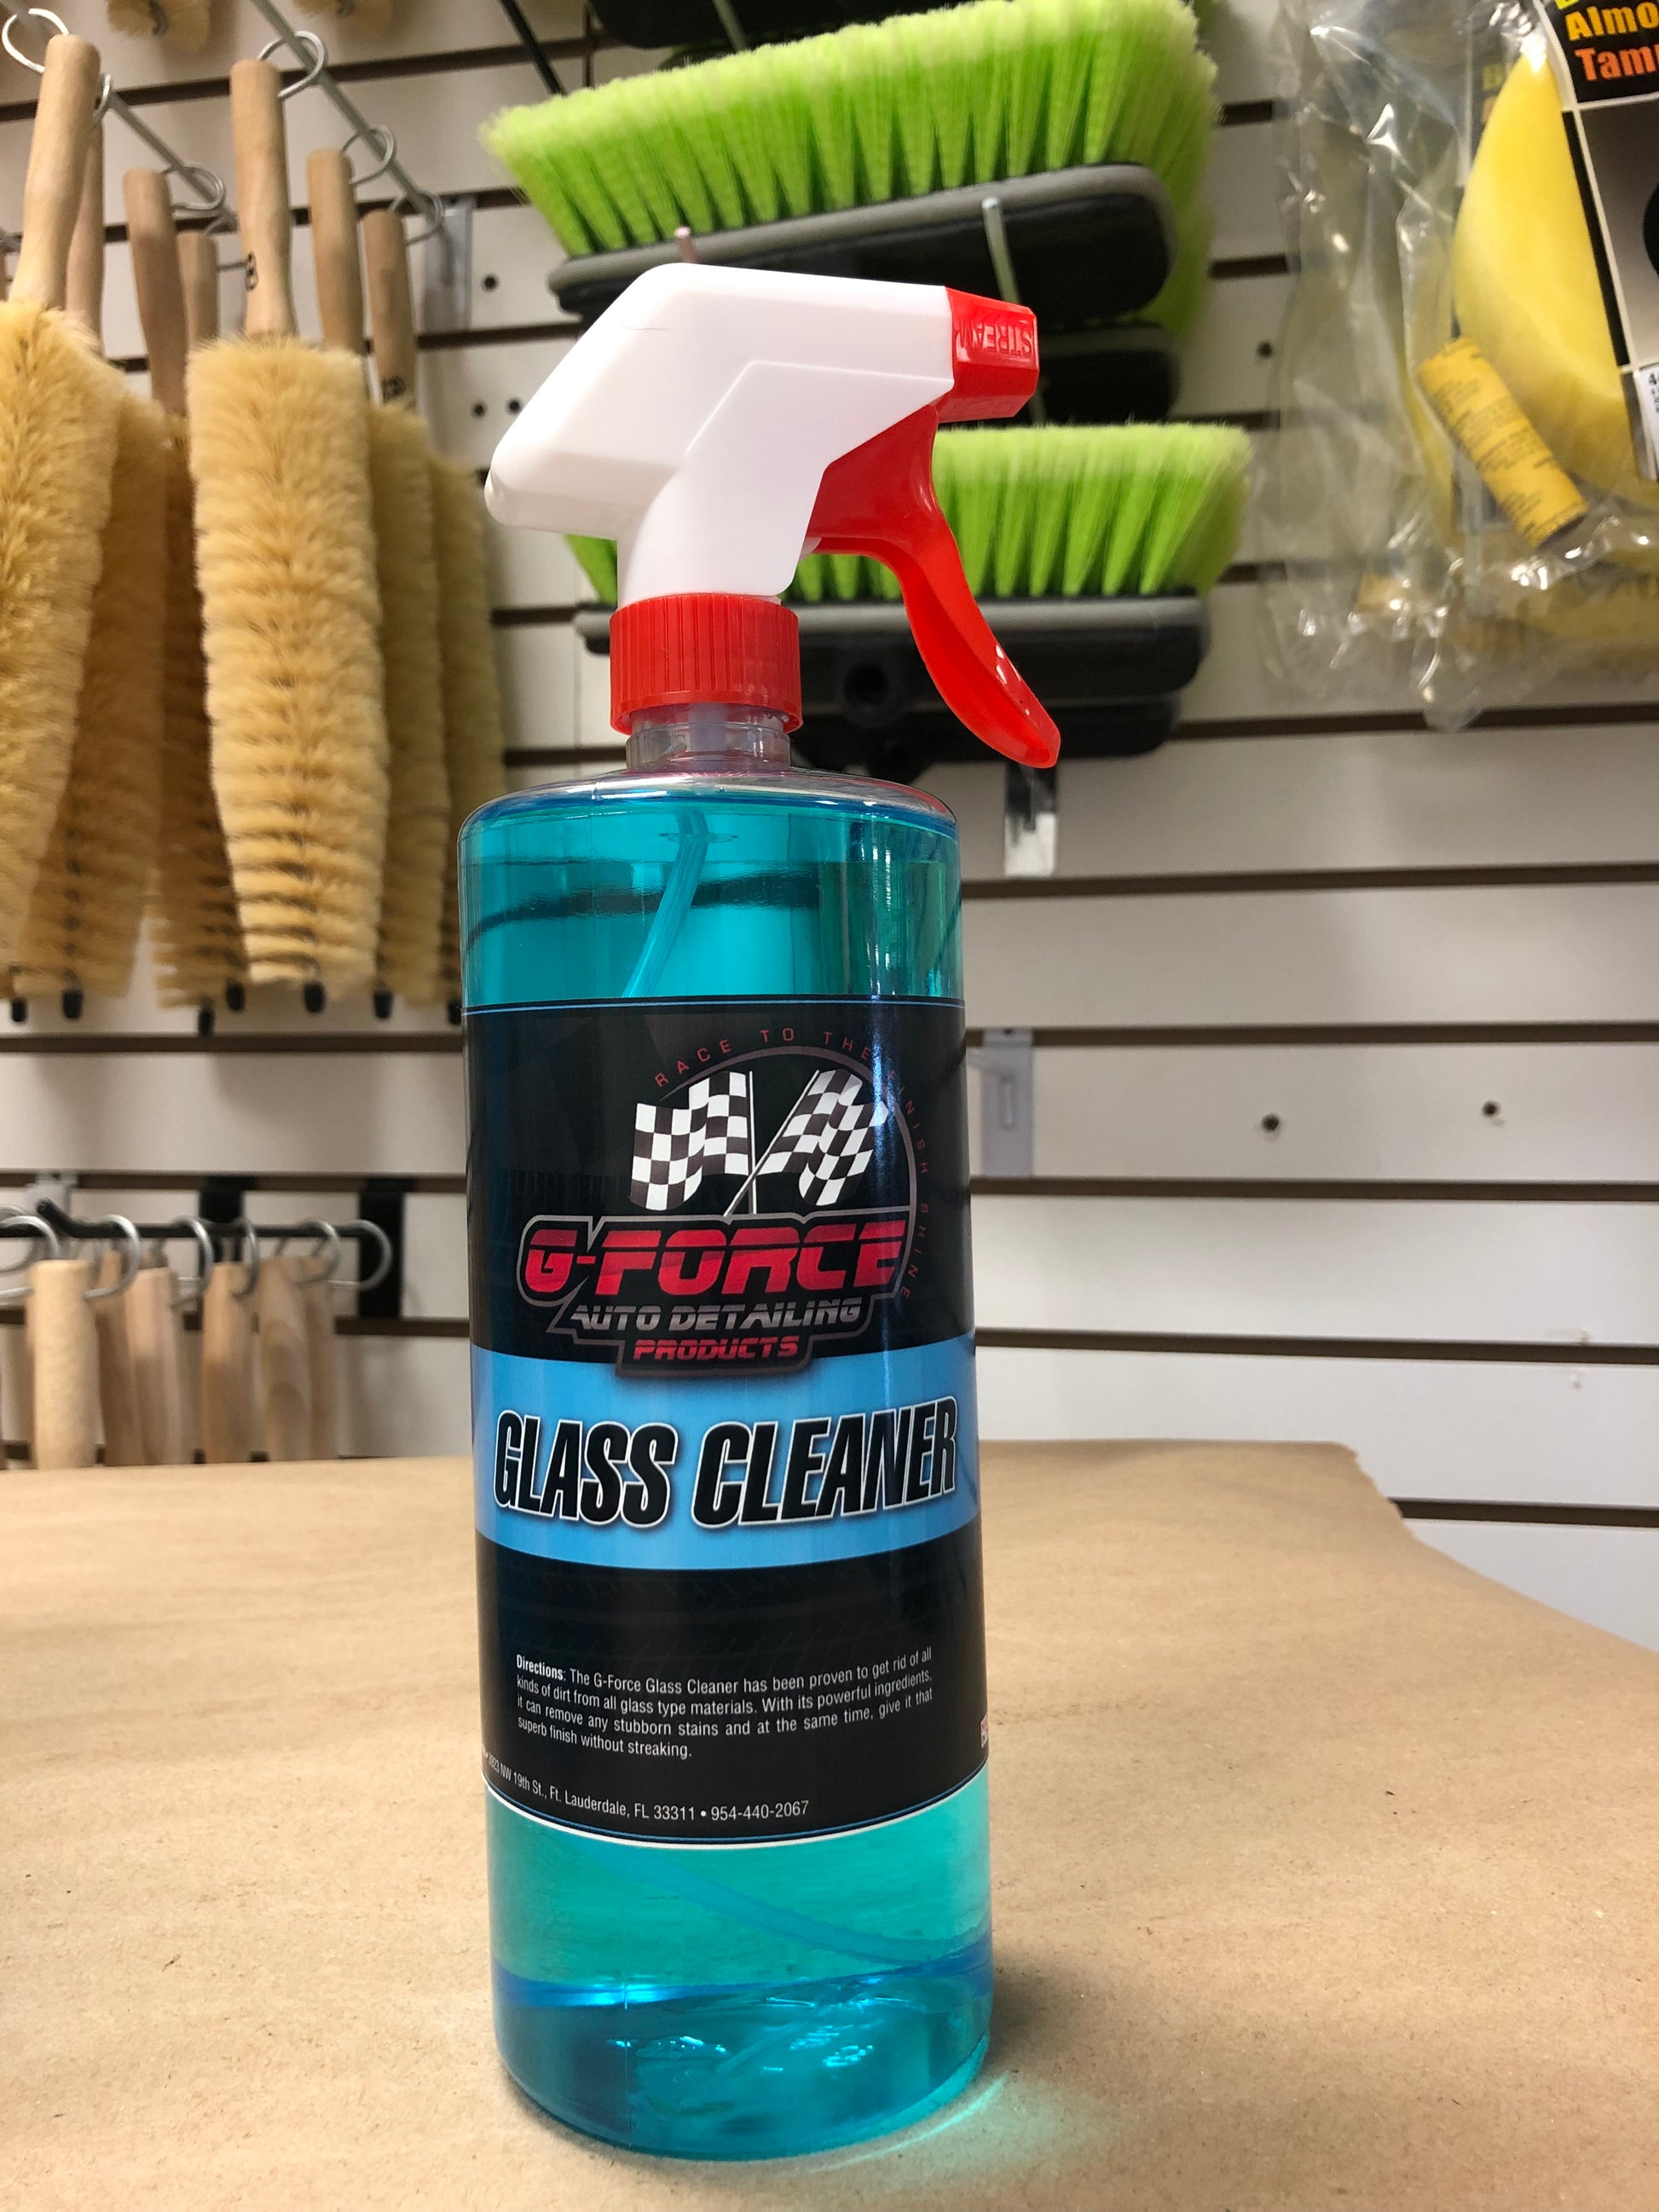 GLASS CLEANER – G Force Auto Detailing Products